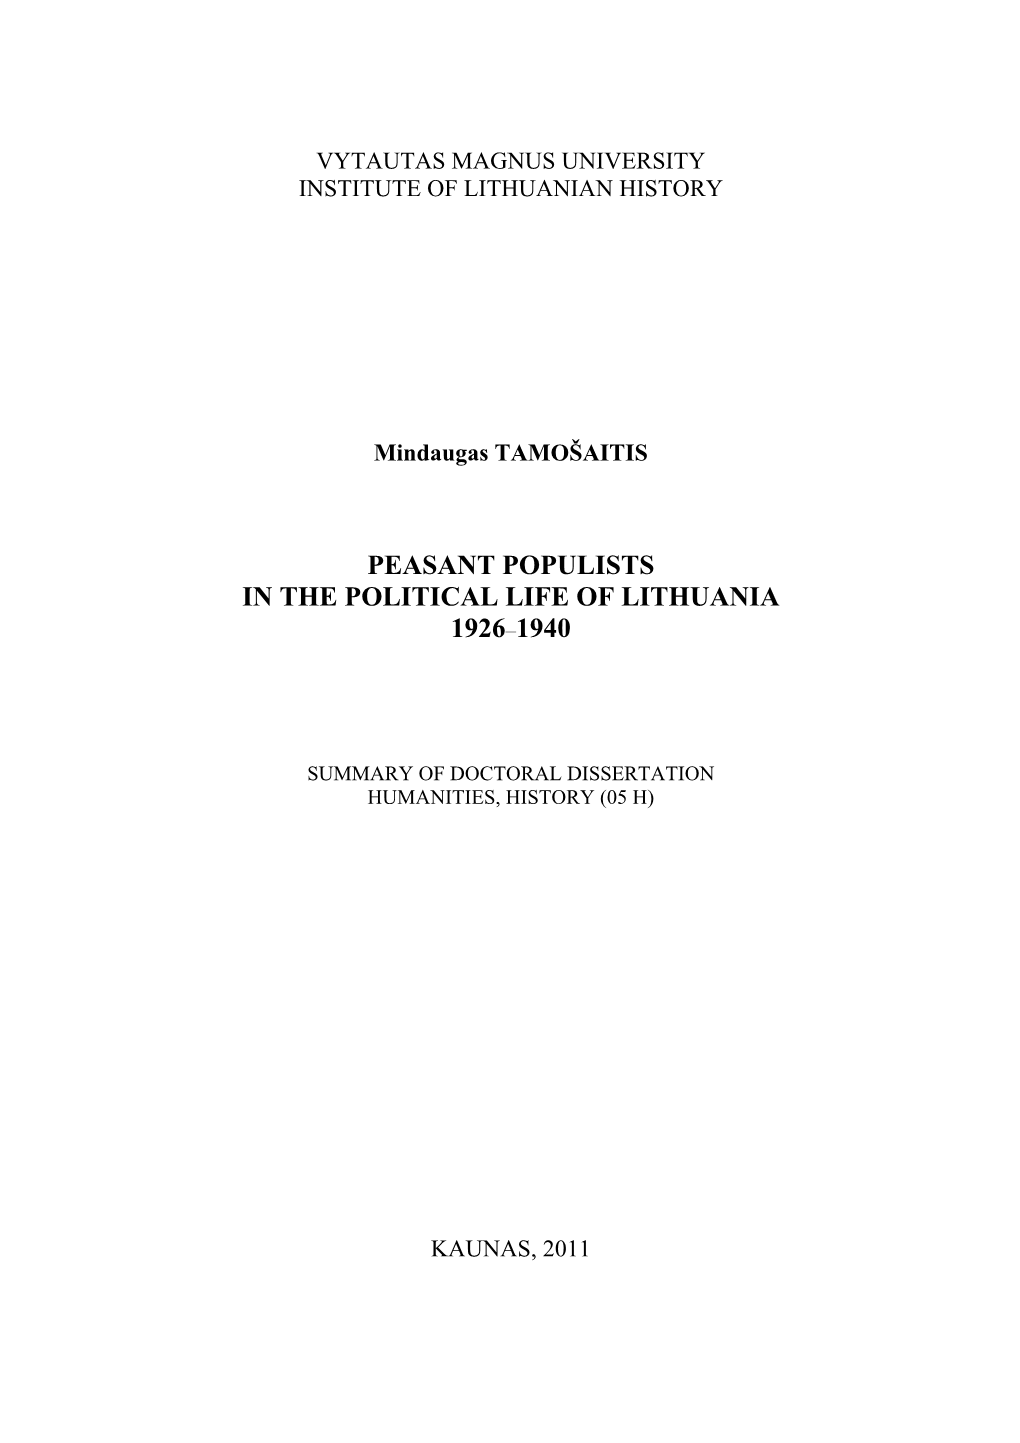 Peasant Populists in the Political Life of Lithuania 1926–1940